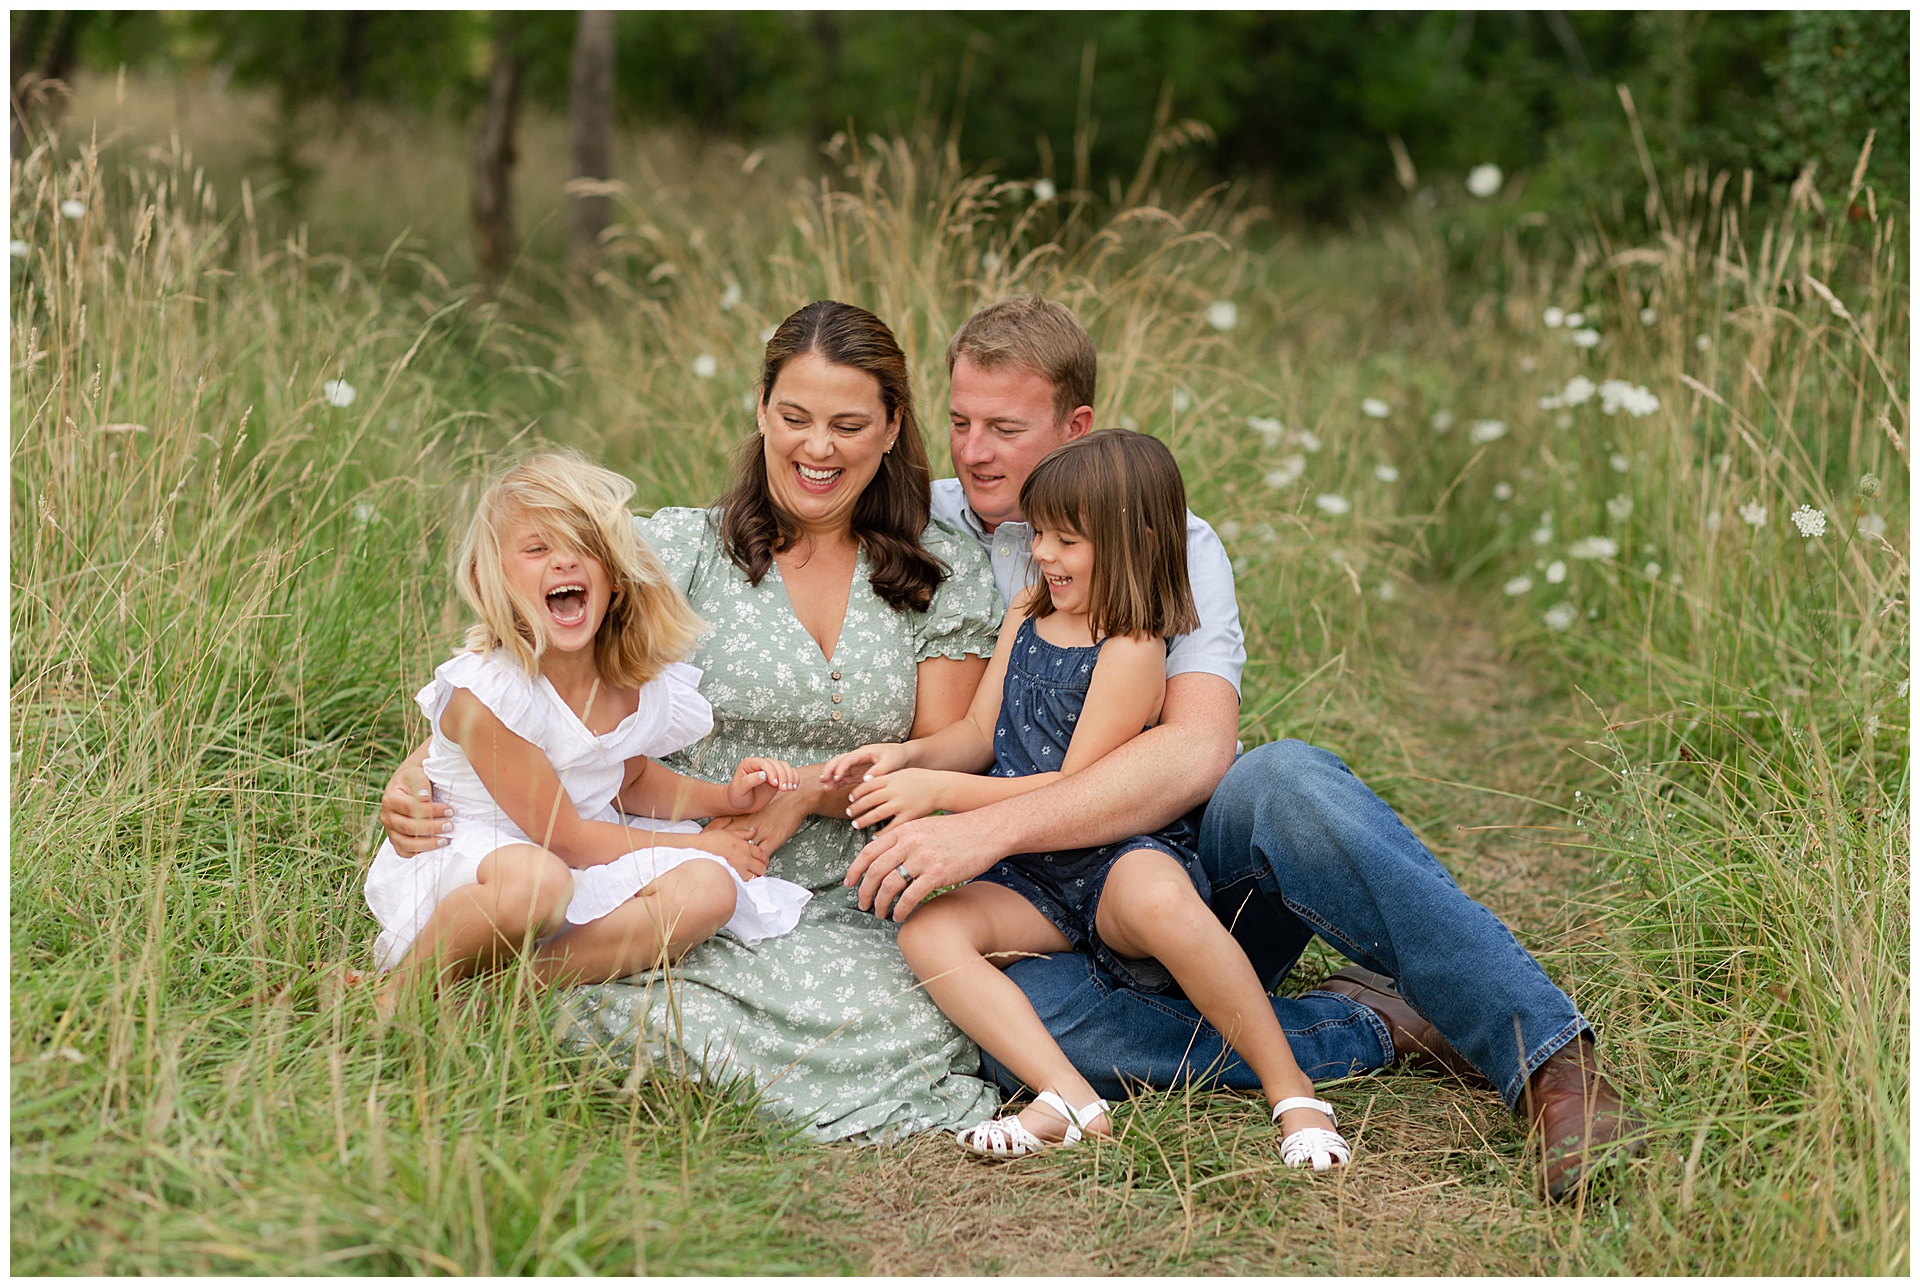 Natural outdoor family photography by Ali Smith Photography